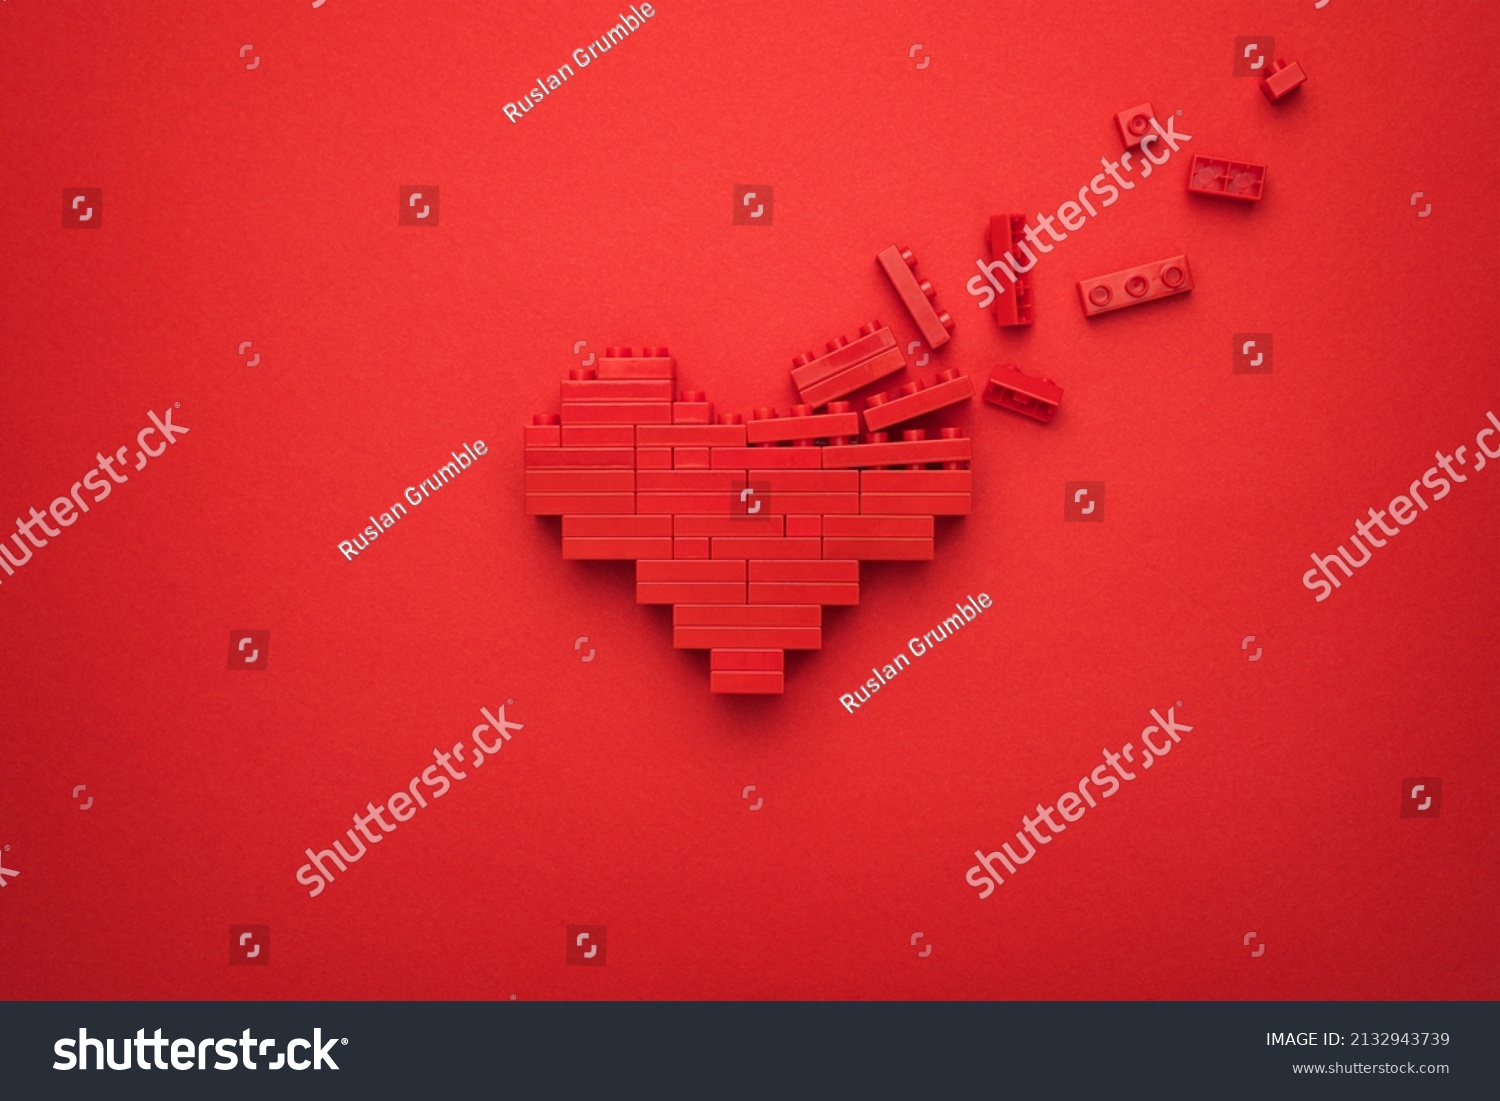 Red falling apart heart symbol made of plastic building blocks. Flat lay image of breaking down like button on red background. Minimalist photo of stylized dissolving love symbol. #2132943739